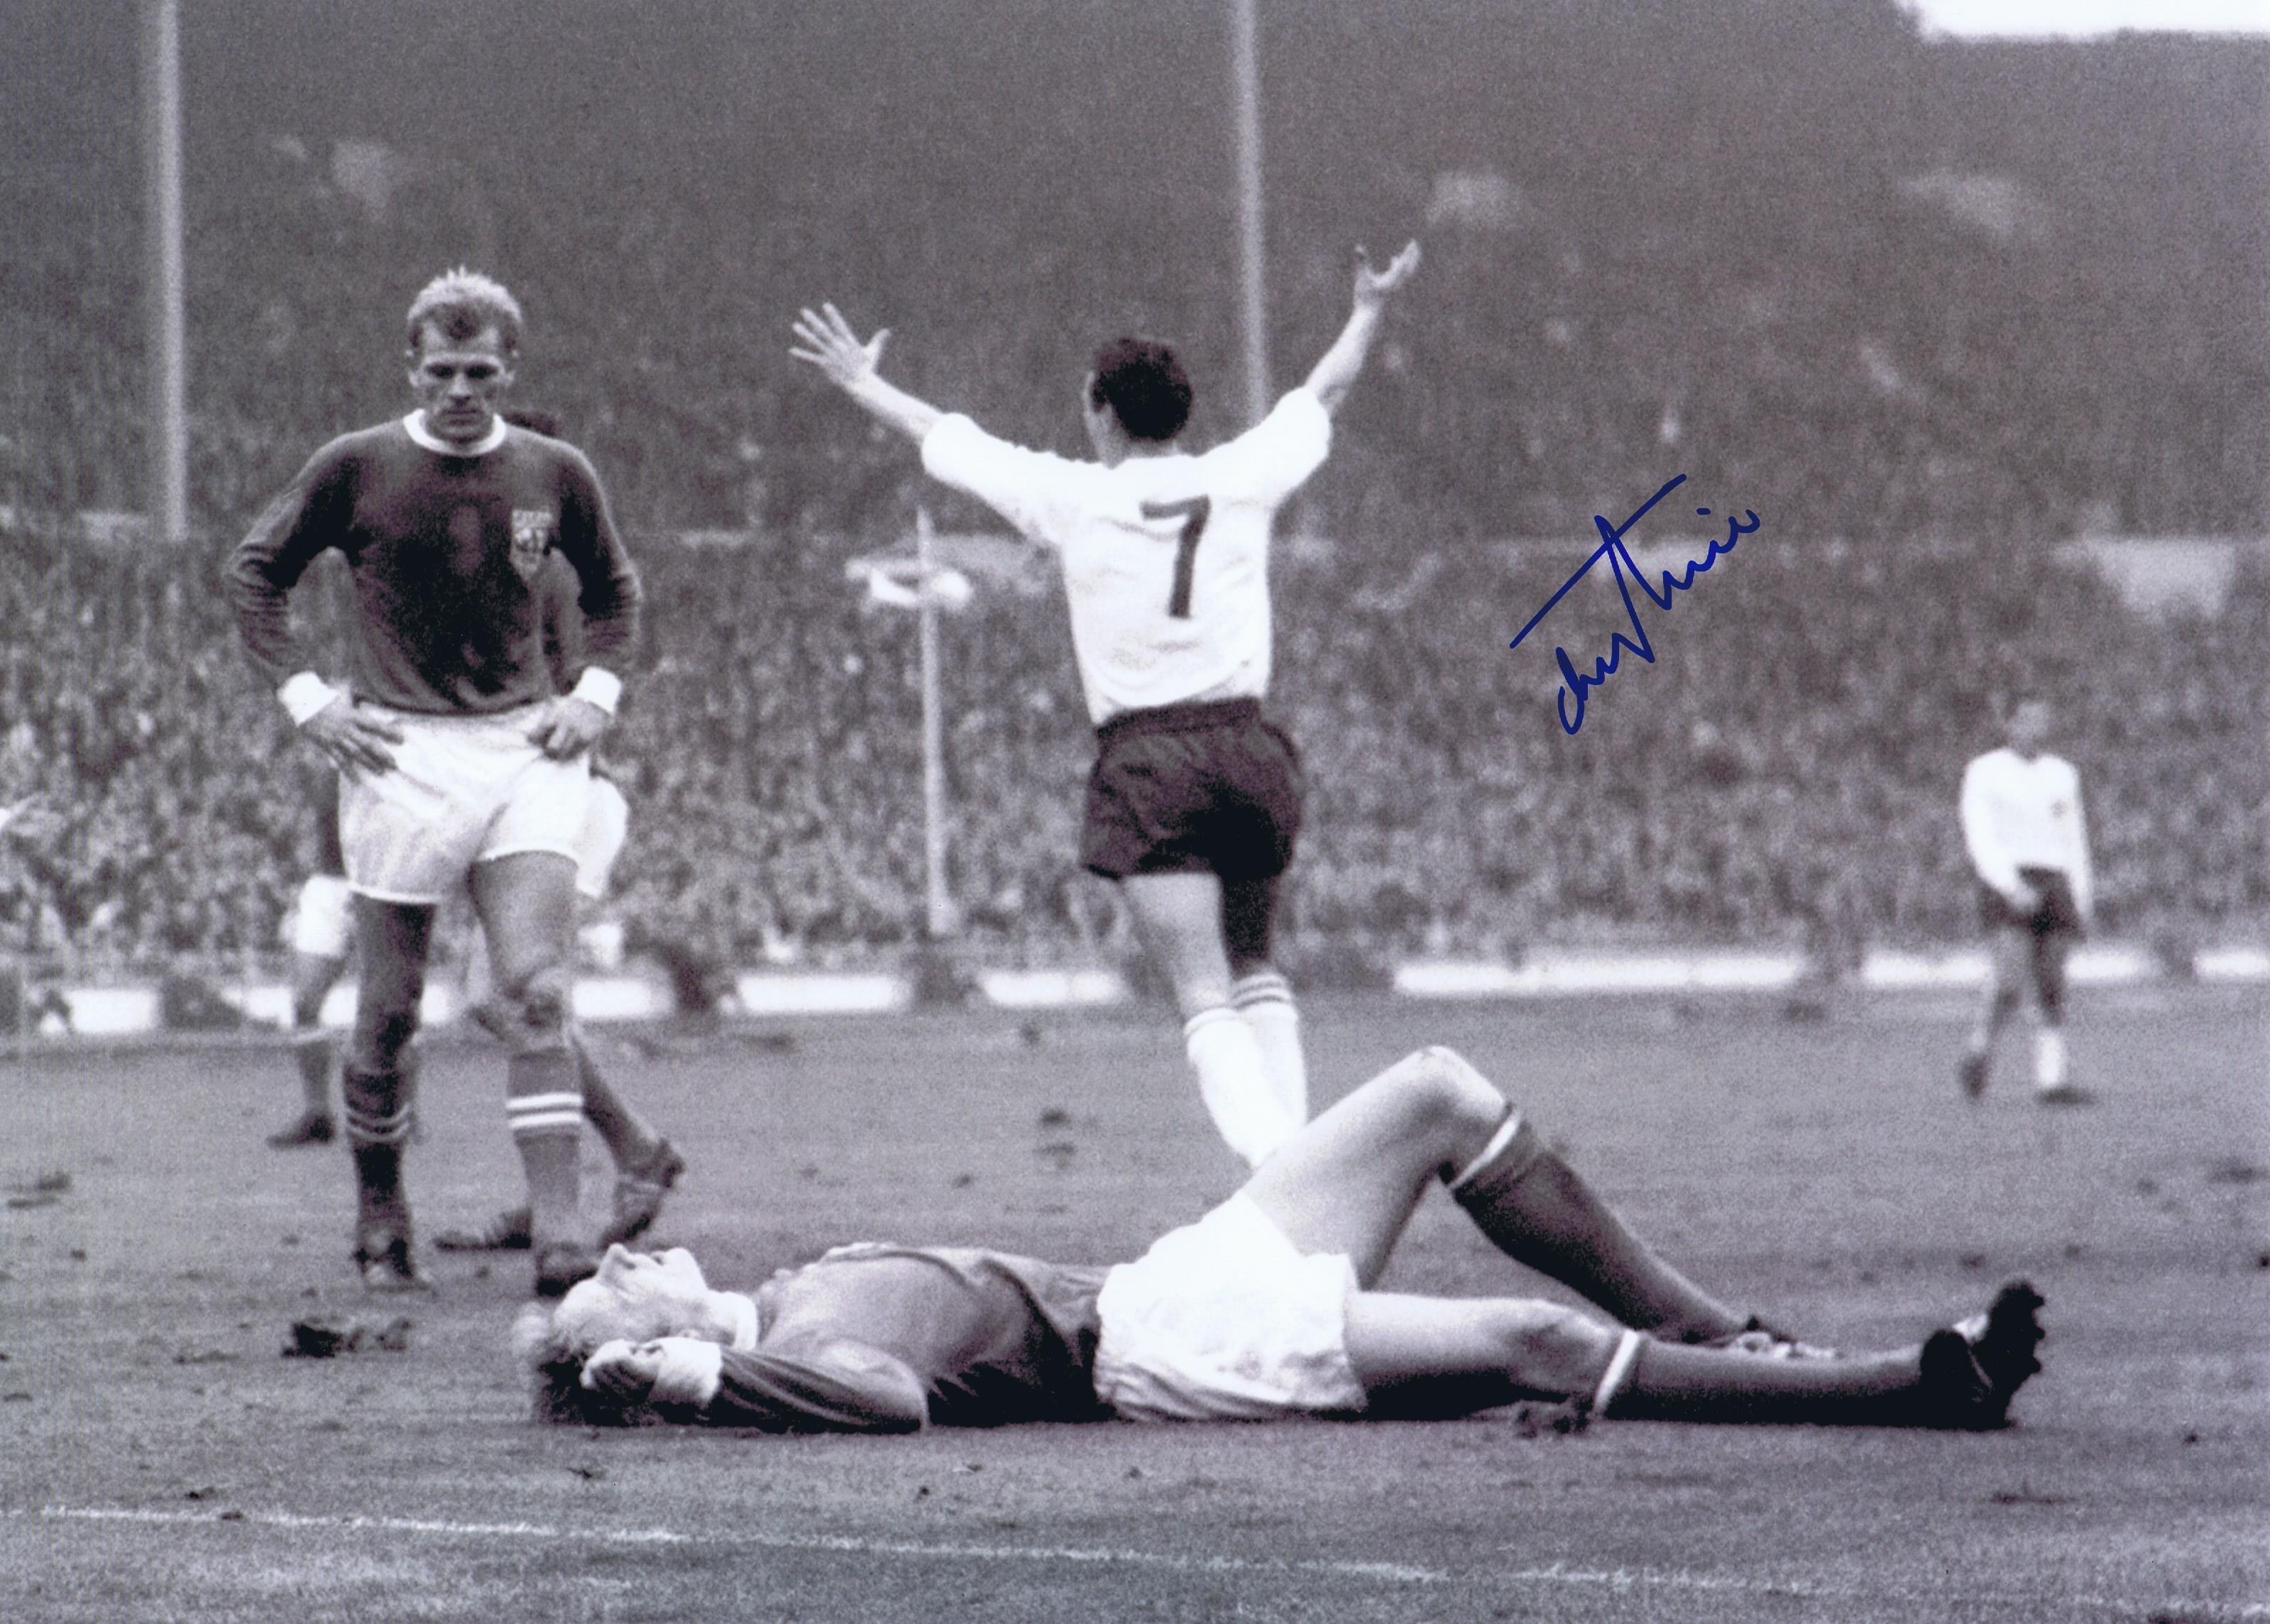 Autographed TERRY PAINE 16 x 12 photo - B/W, depicting Paine celebrating after scoring the opening